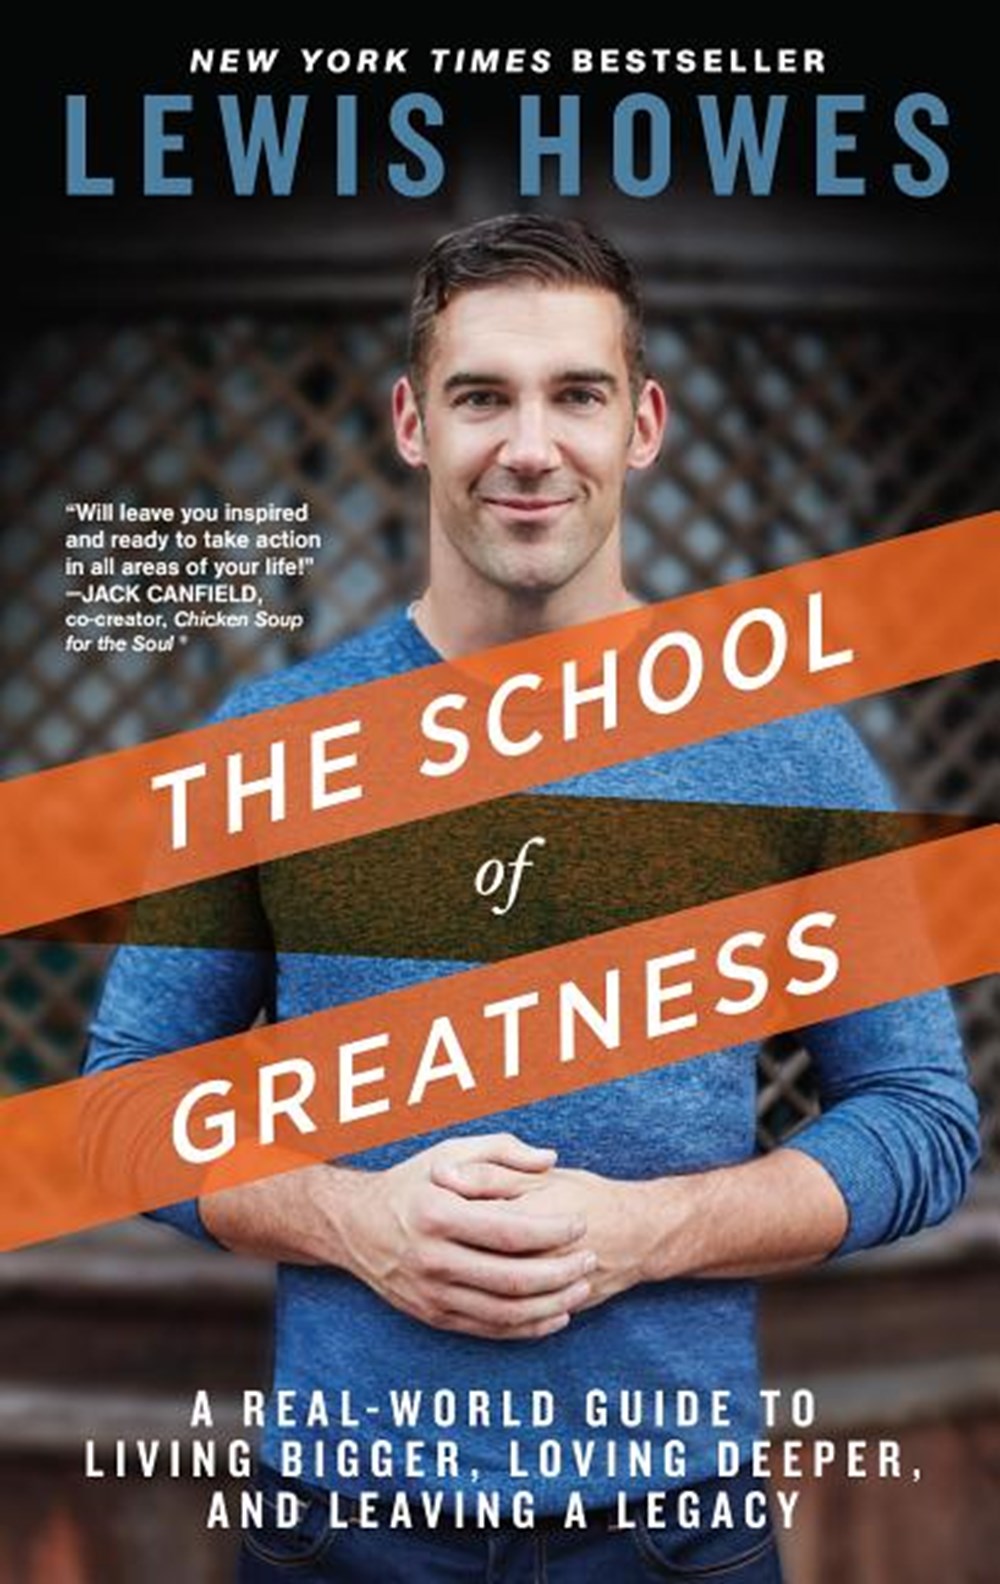 School of Greatness: A Real-World Guide to Living Bigger, Loving Deeper, and Leaving a Legacy